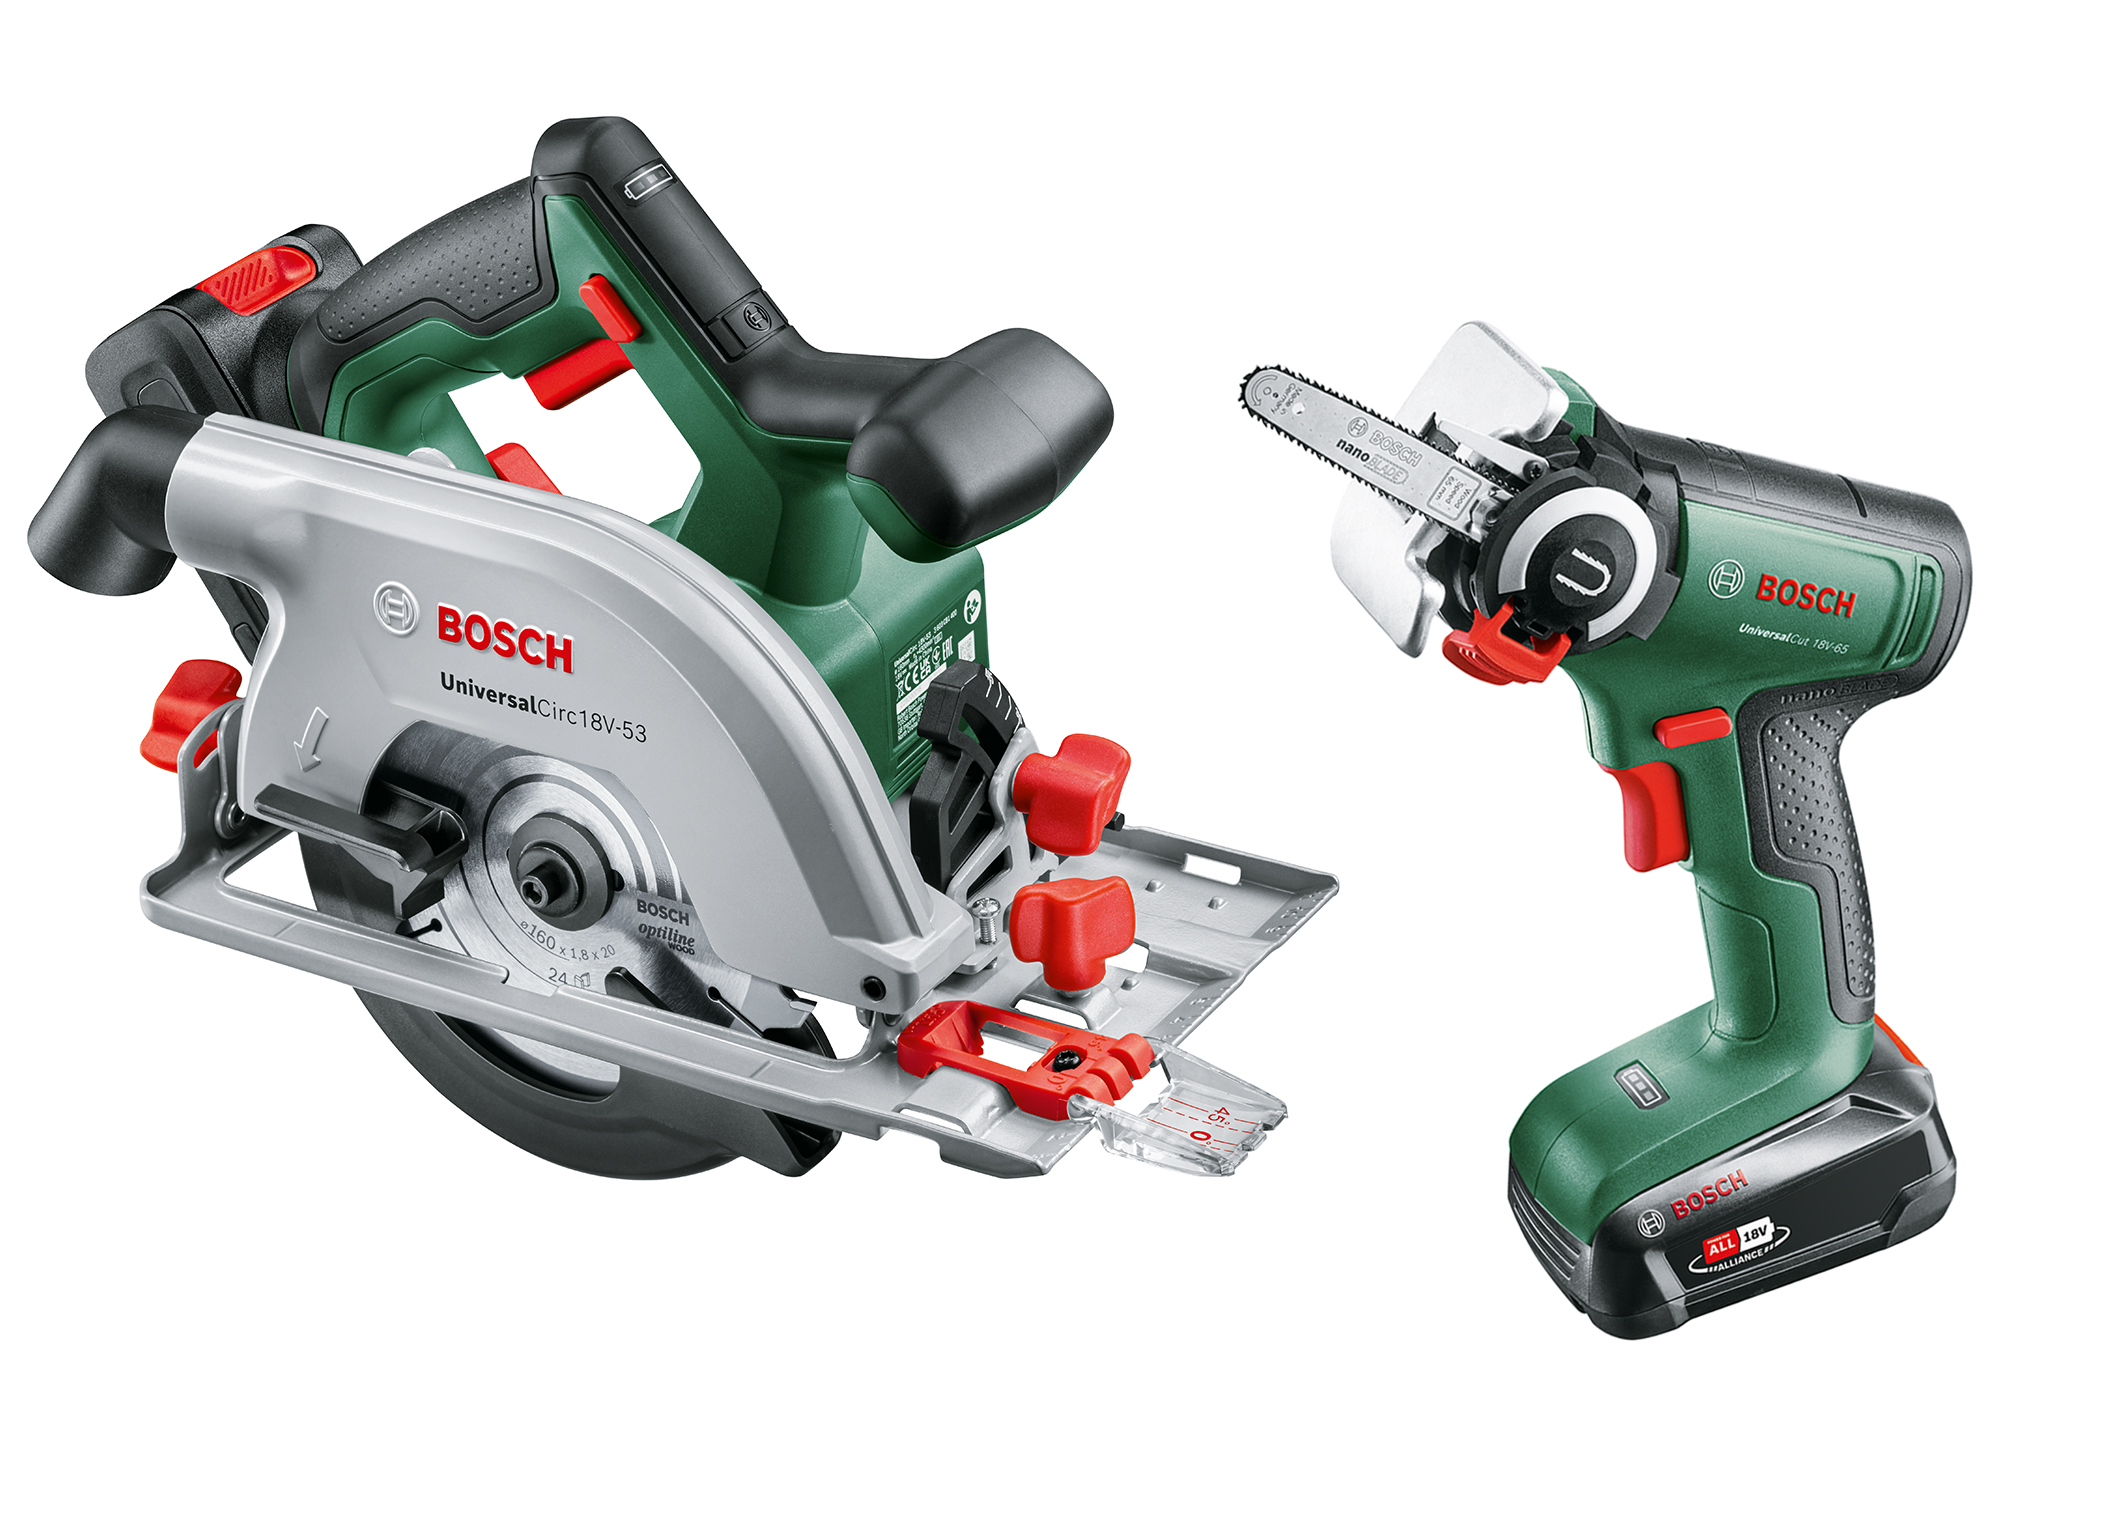 Latest additions to the ‘18V Power for All System’: Two new cordless saws from Bosch for DIYers